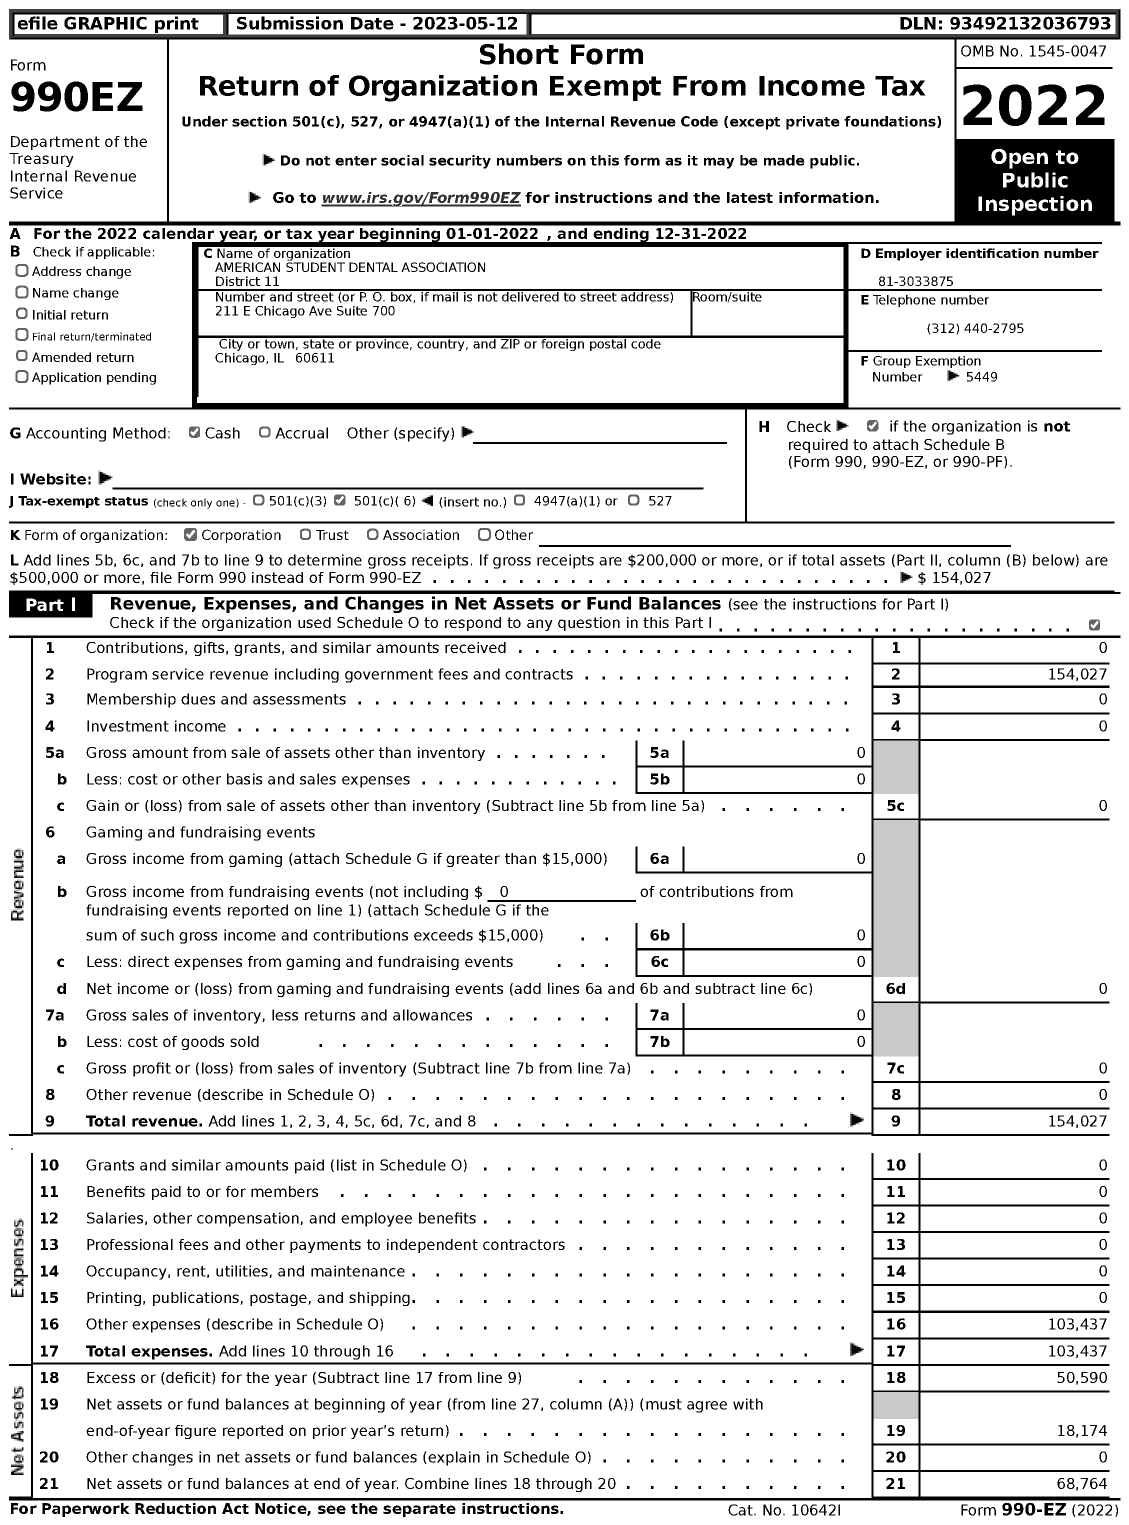 Image of first page of 2022 Form 990EZ for AMERICAN STUDENT DENTAL ASSOCIATION - 11 District